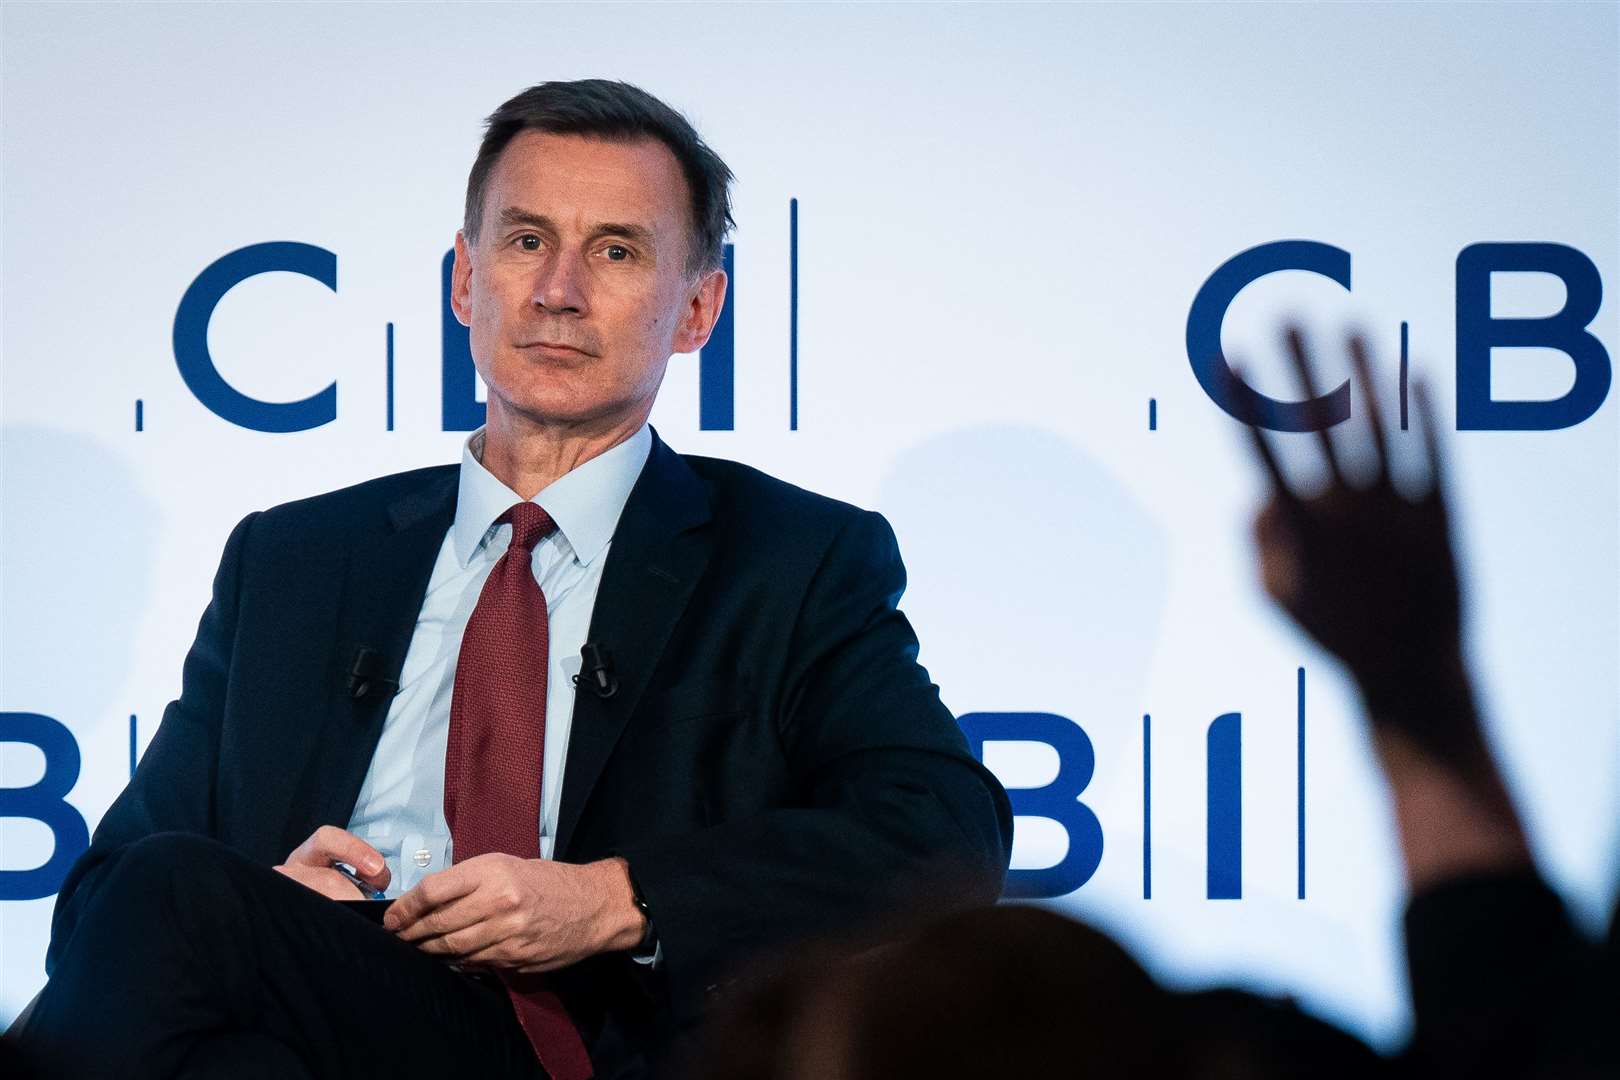 Chancellor Jeremy Hunt said some of the pro-Palestine protests had crossed a line (Aaron Chown/PA)